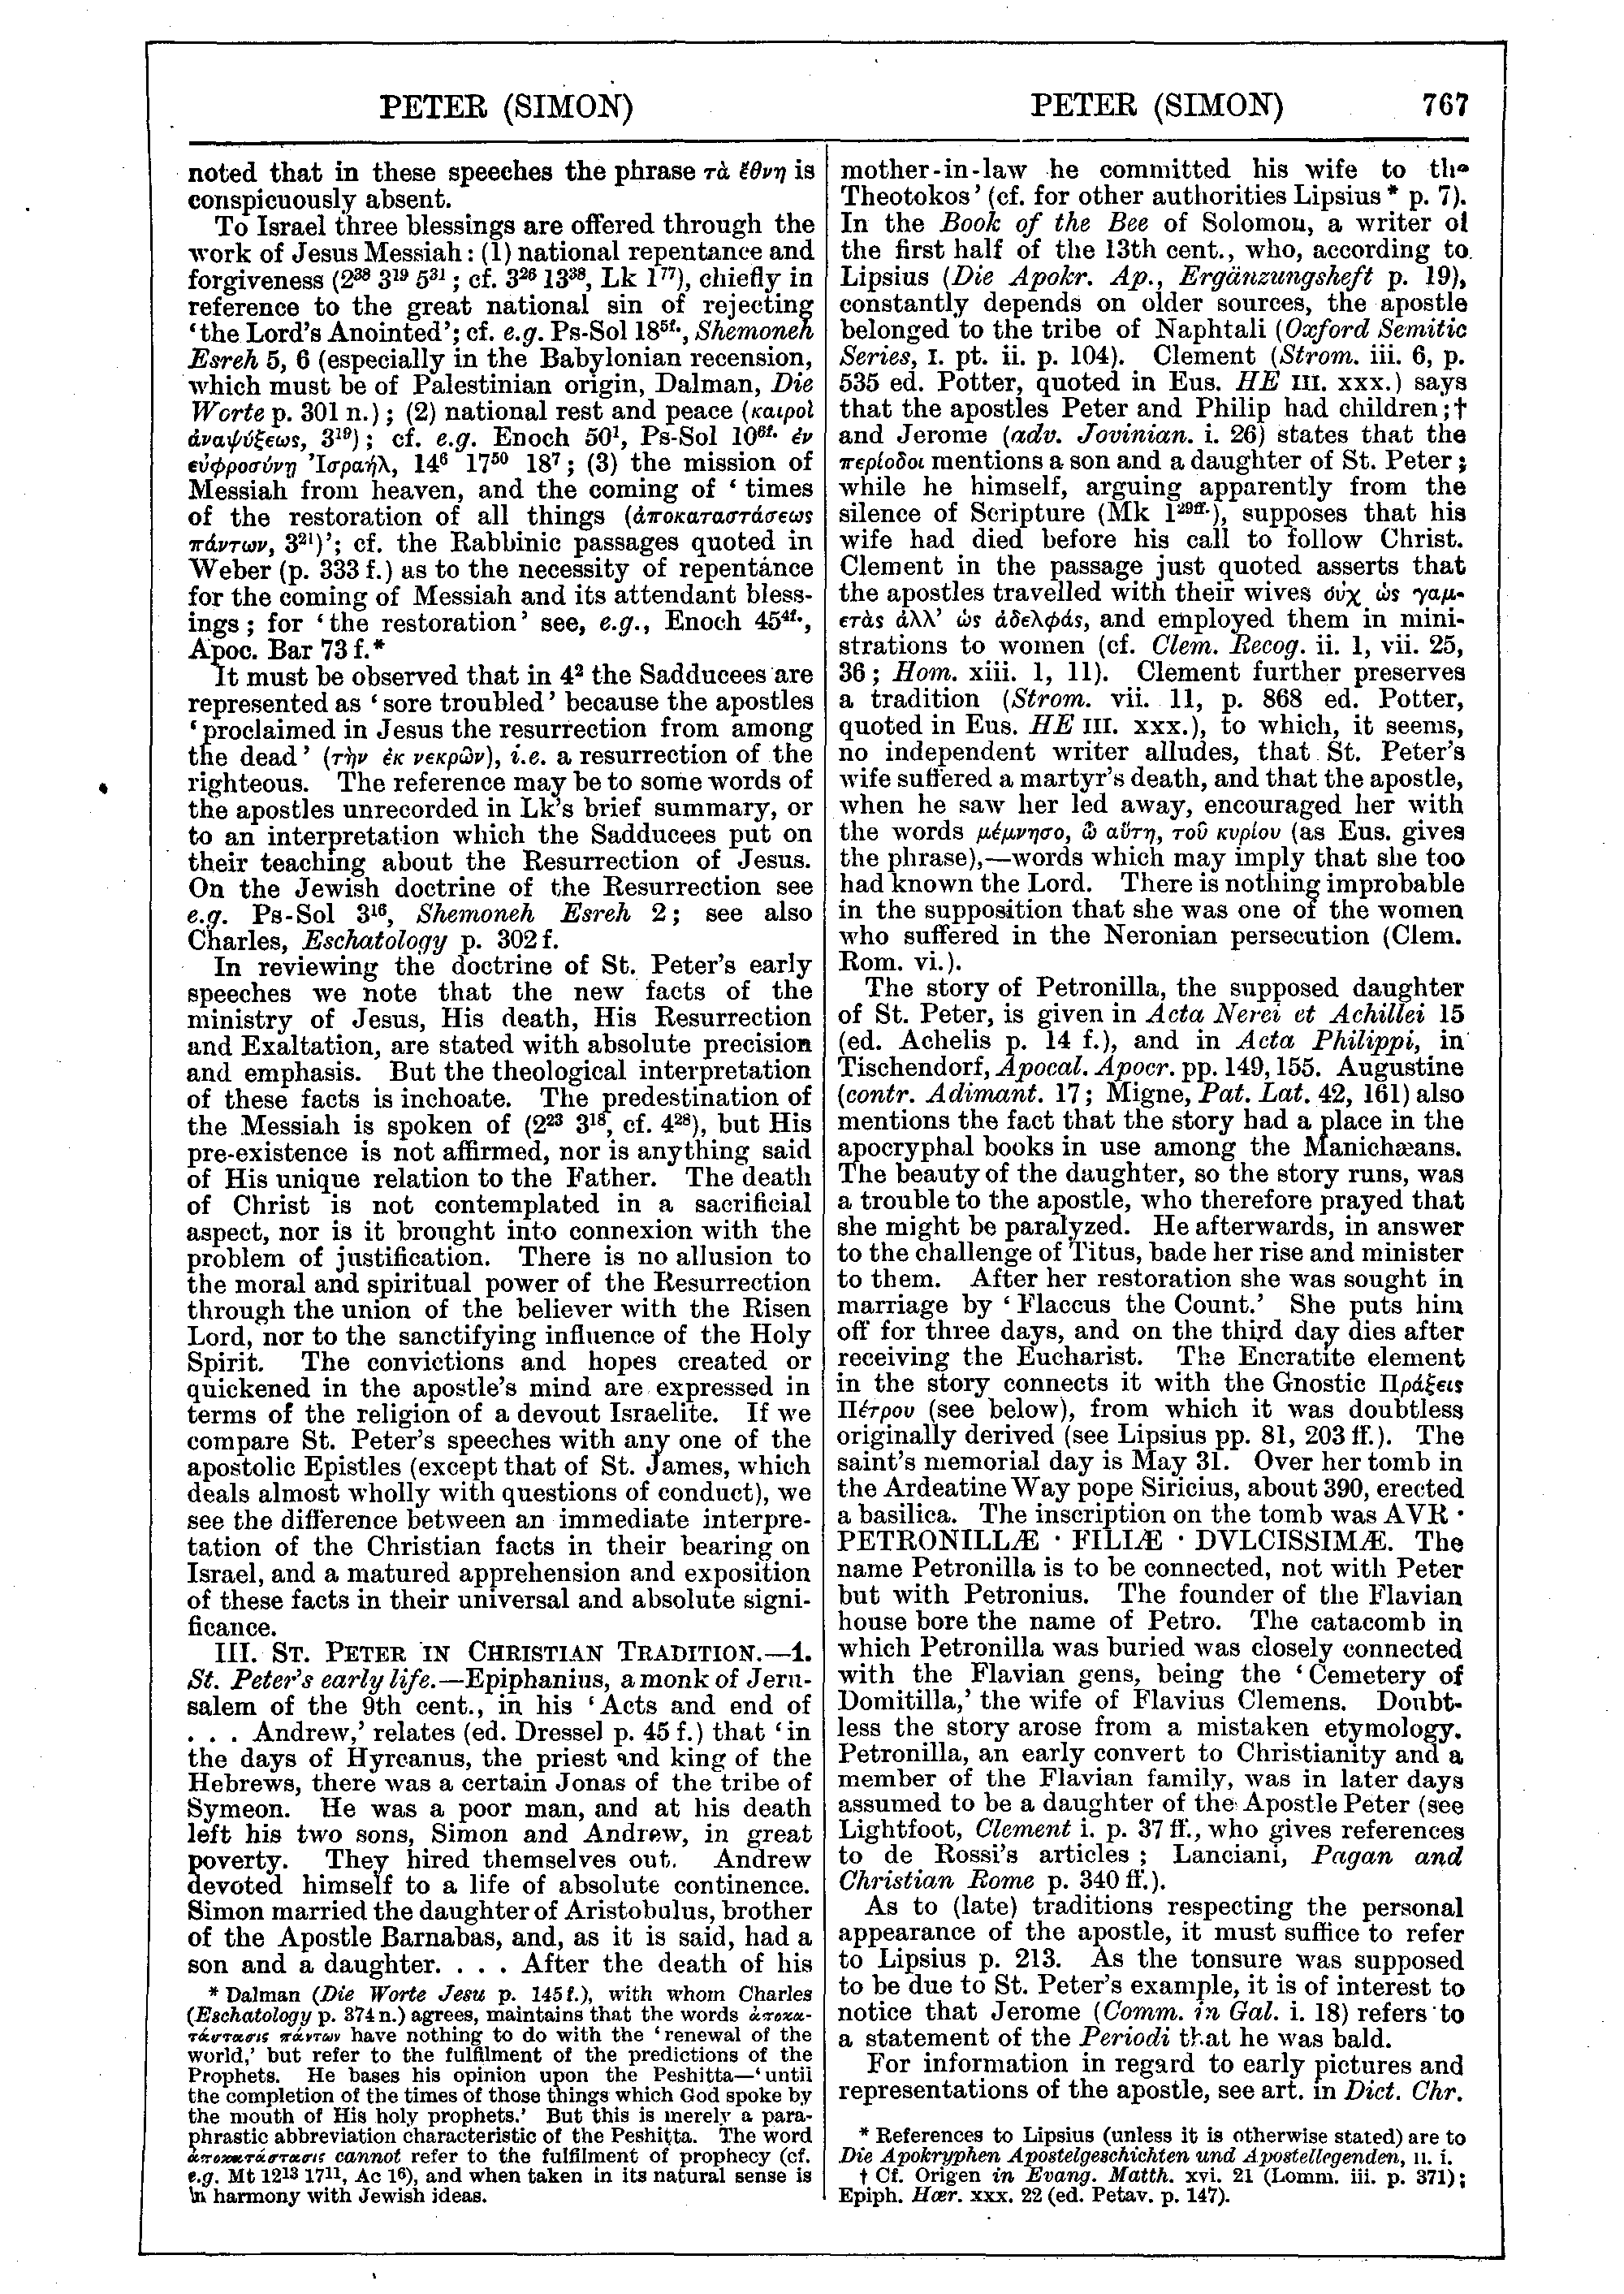 Image of page 767